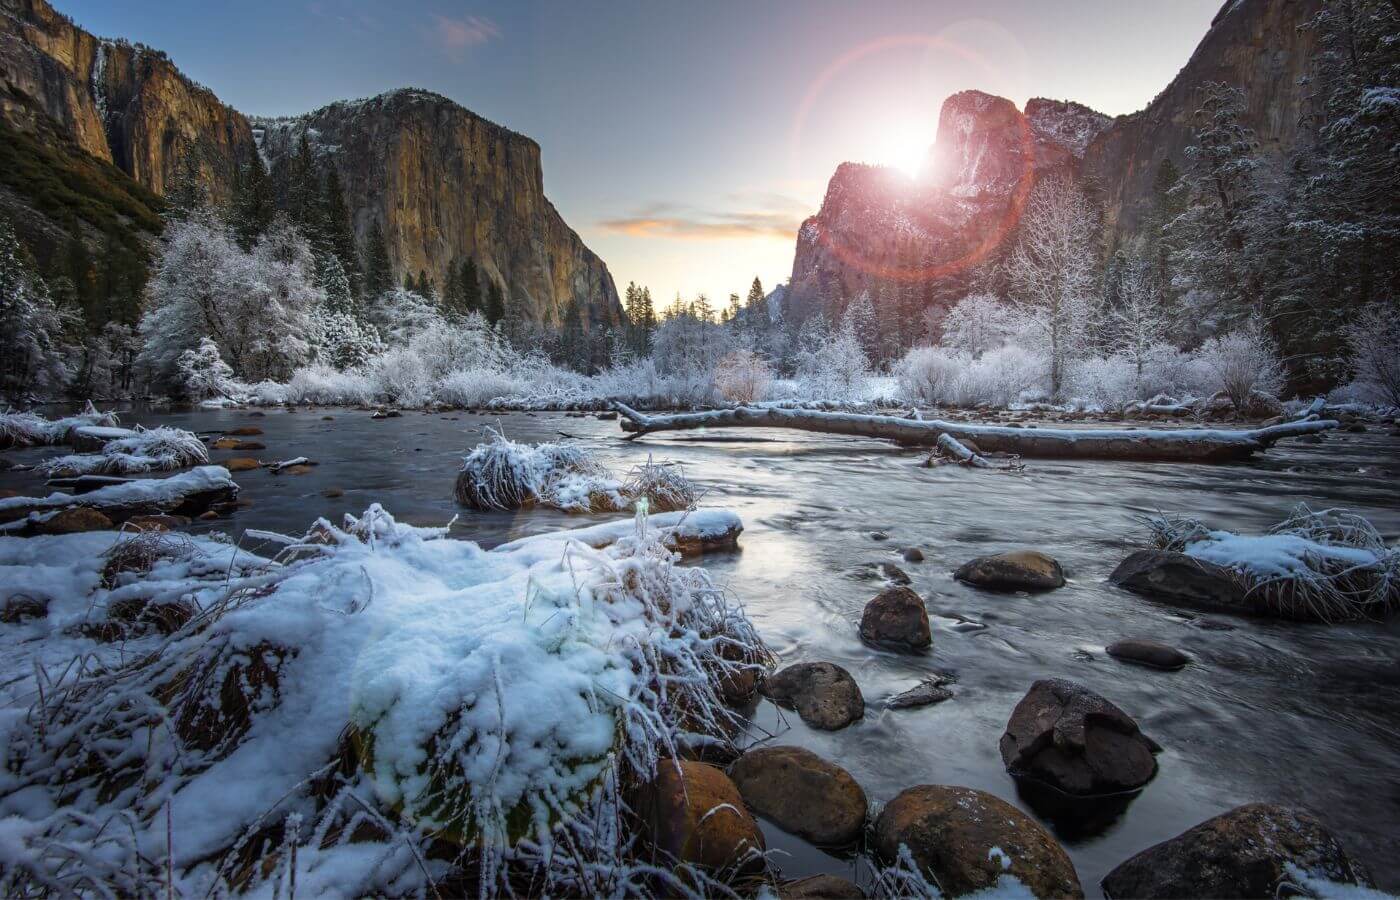 A snowy landscape in a national park.